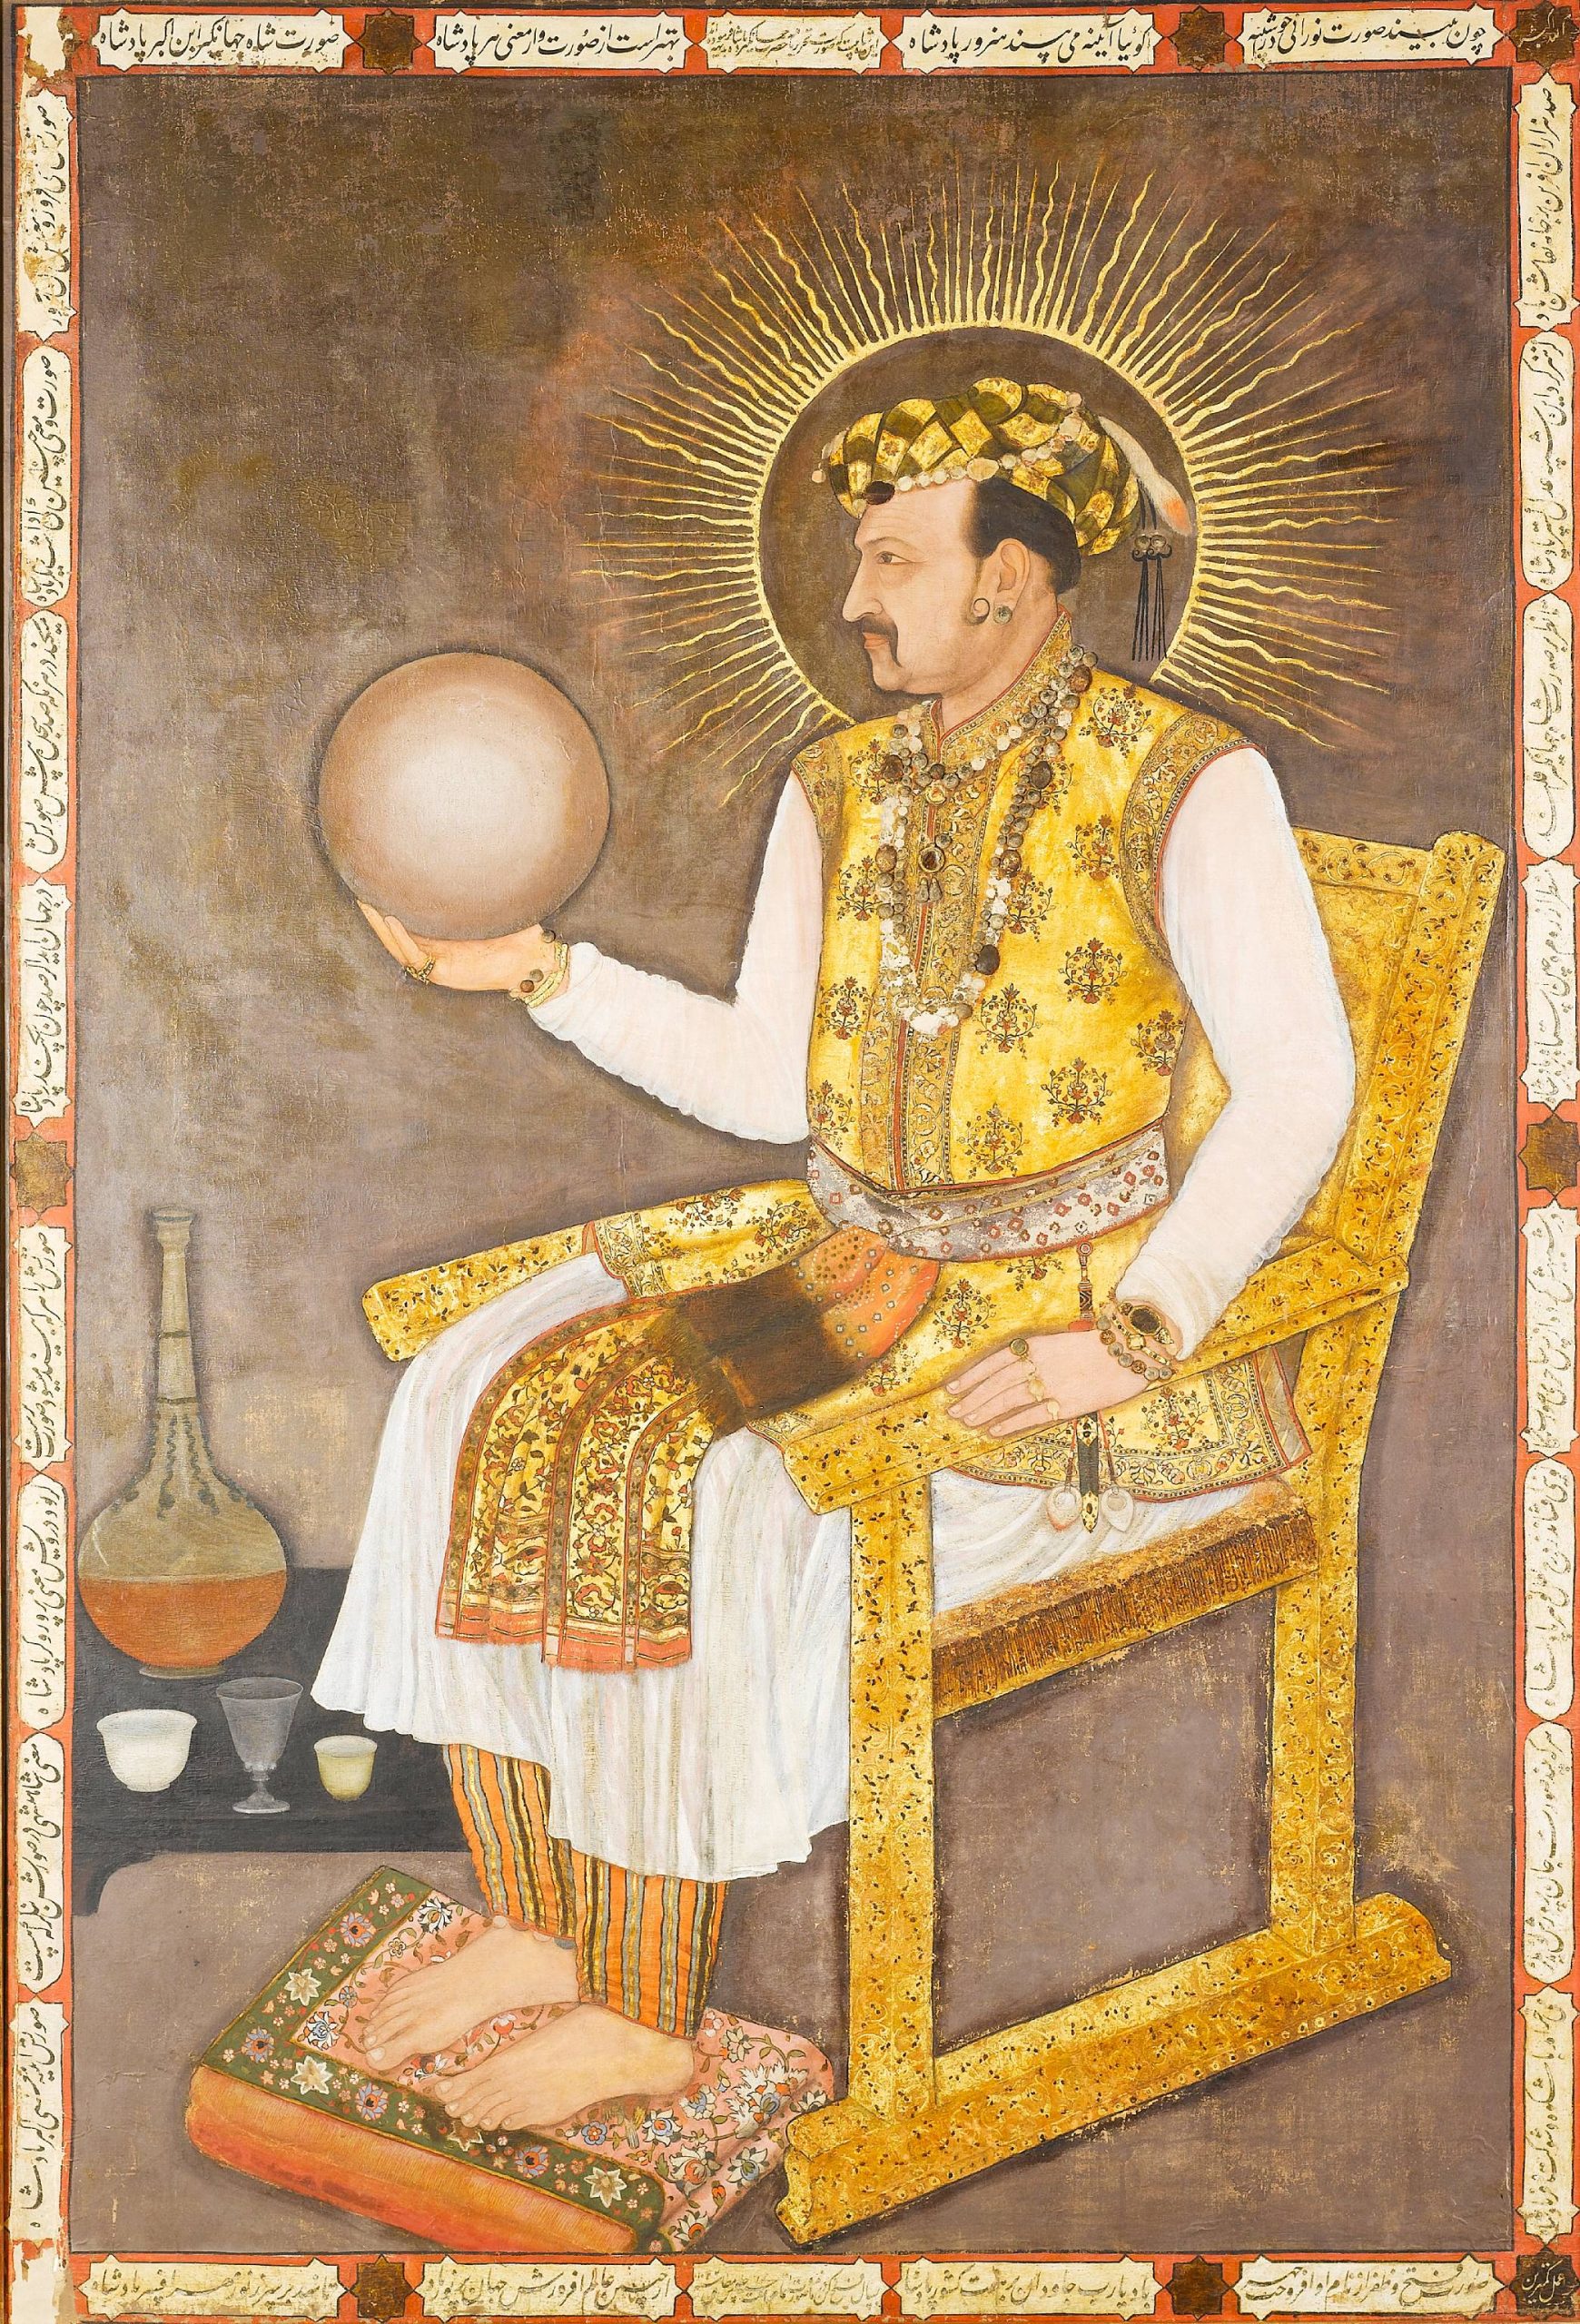 Anyone Got £1M to Buy this Lifesize Portrait of Jehangir?